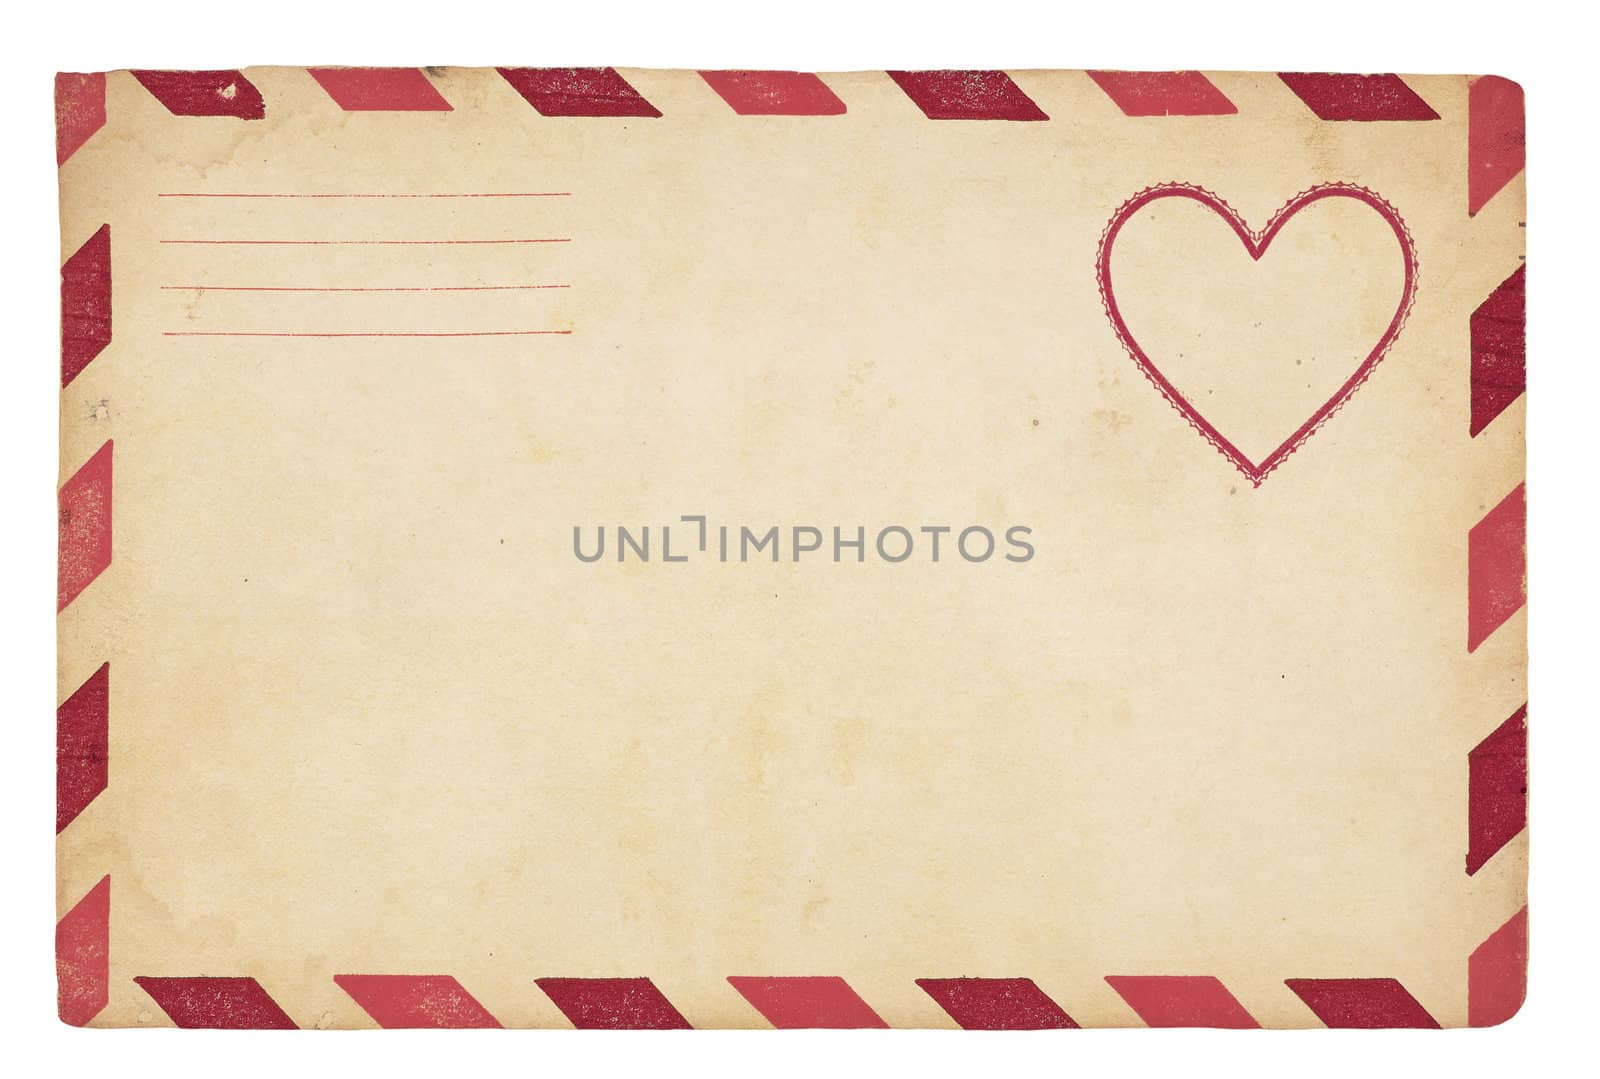 The front of an vintage Valentine-themed envelope with red striped border. Isolated on white with clipping path.